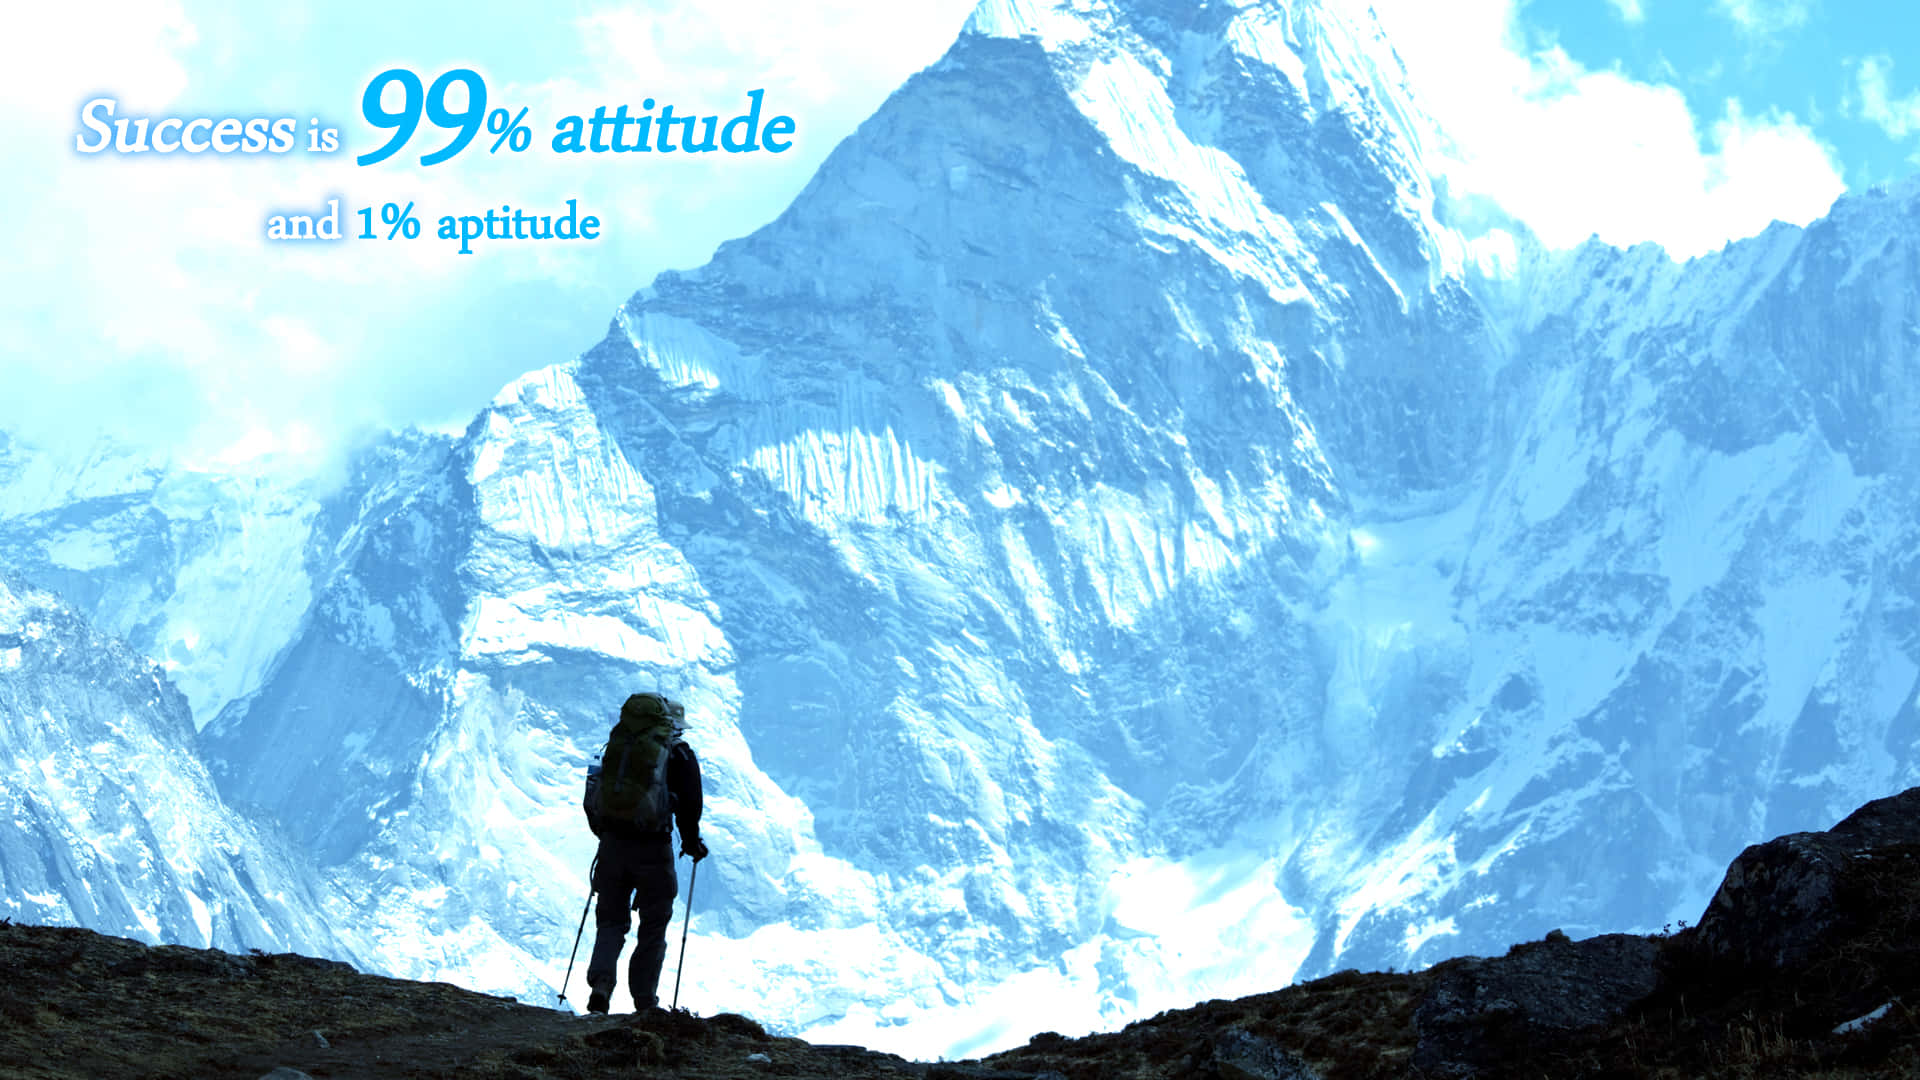 A Person Standing On Top Of A Mountain With The Words Success 99% Attitude